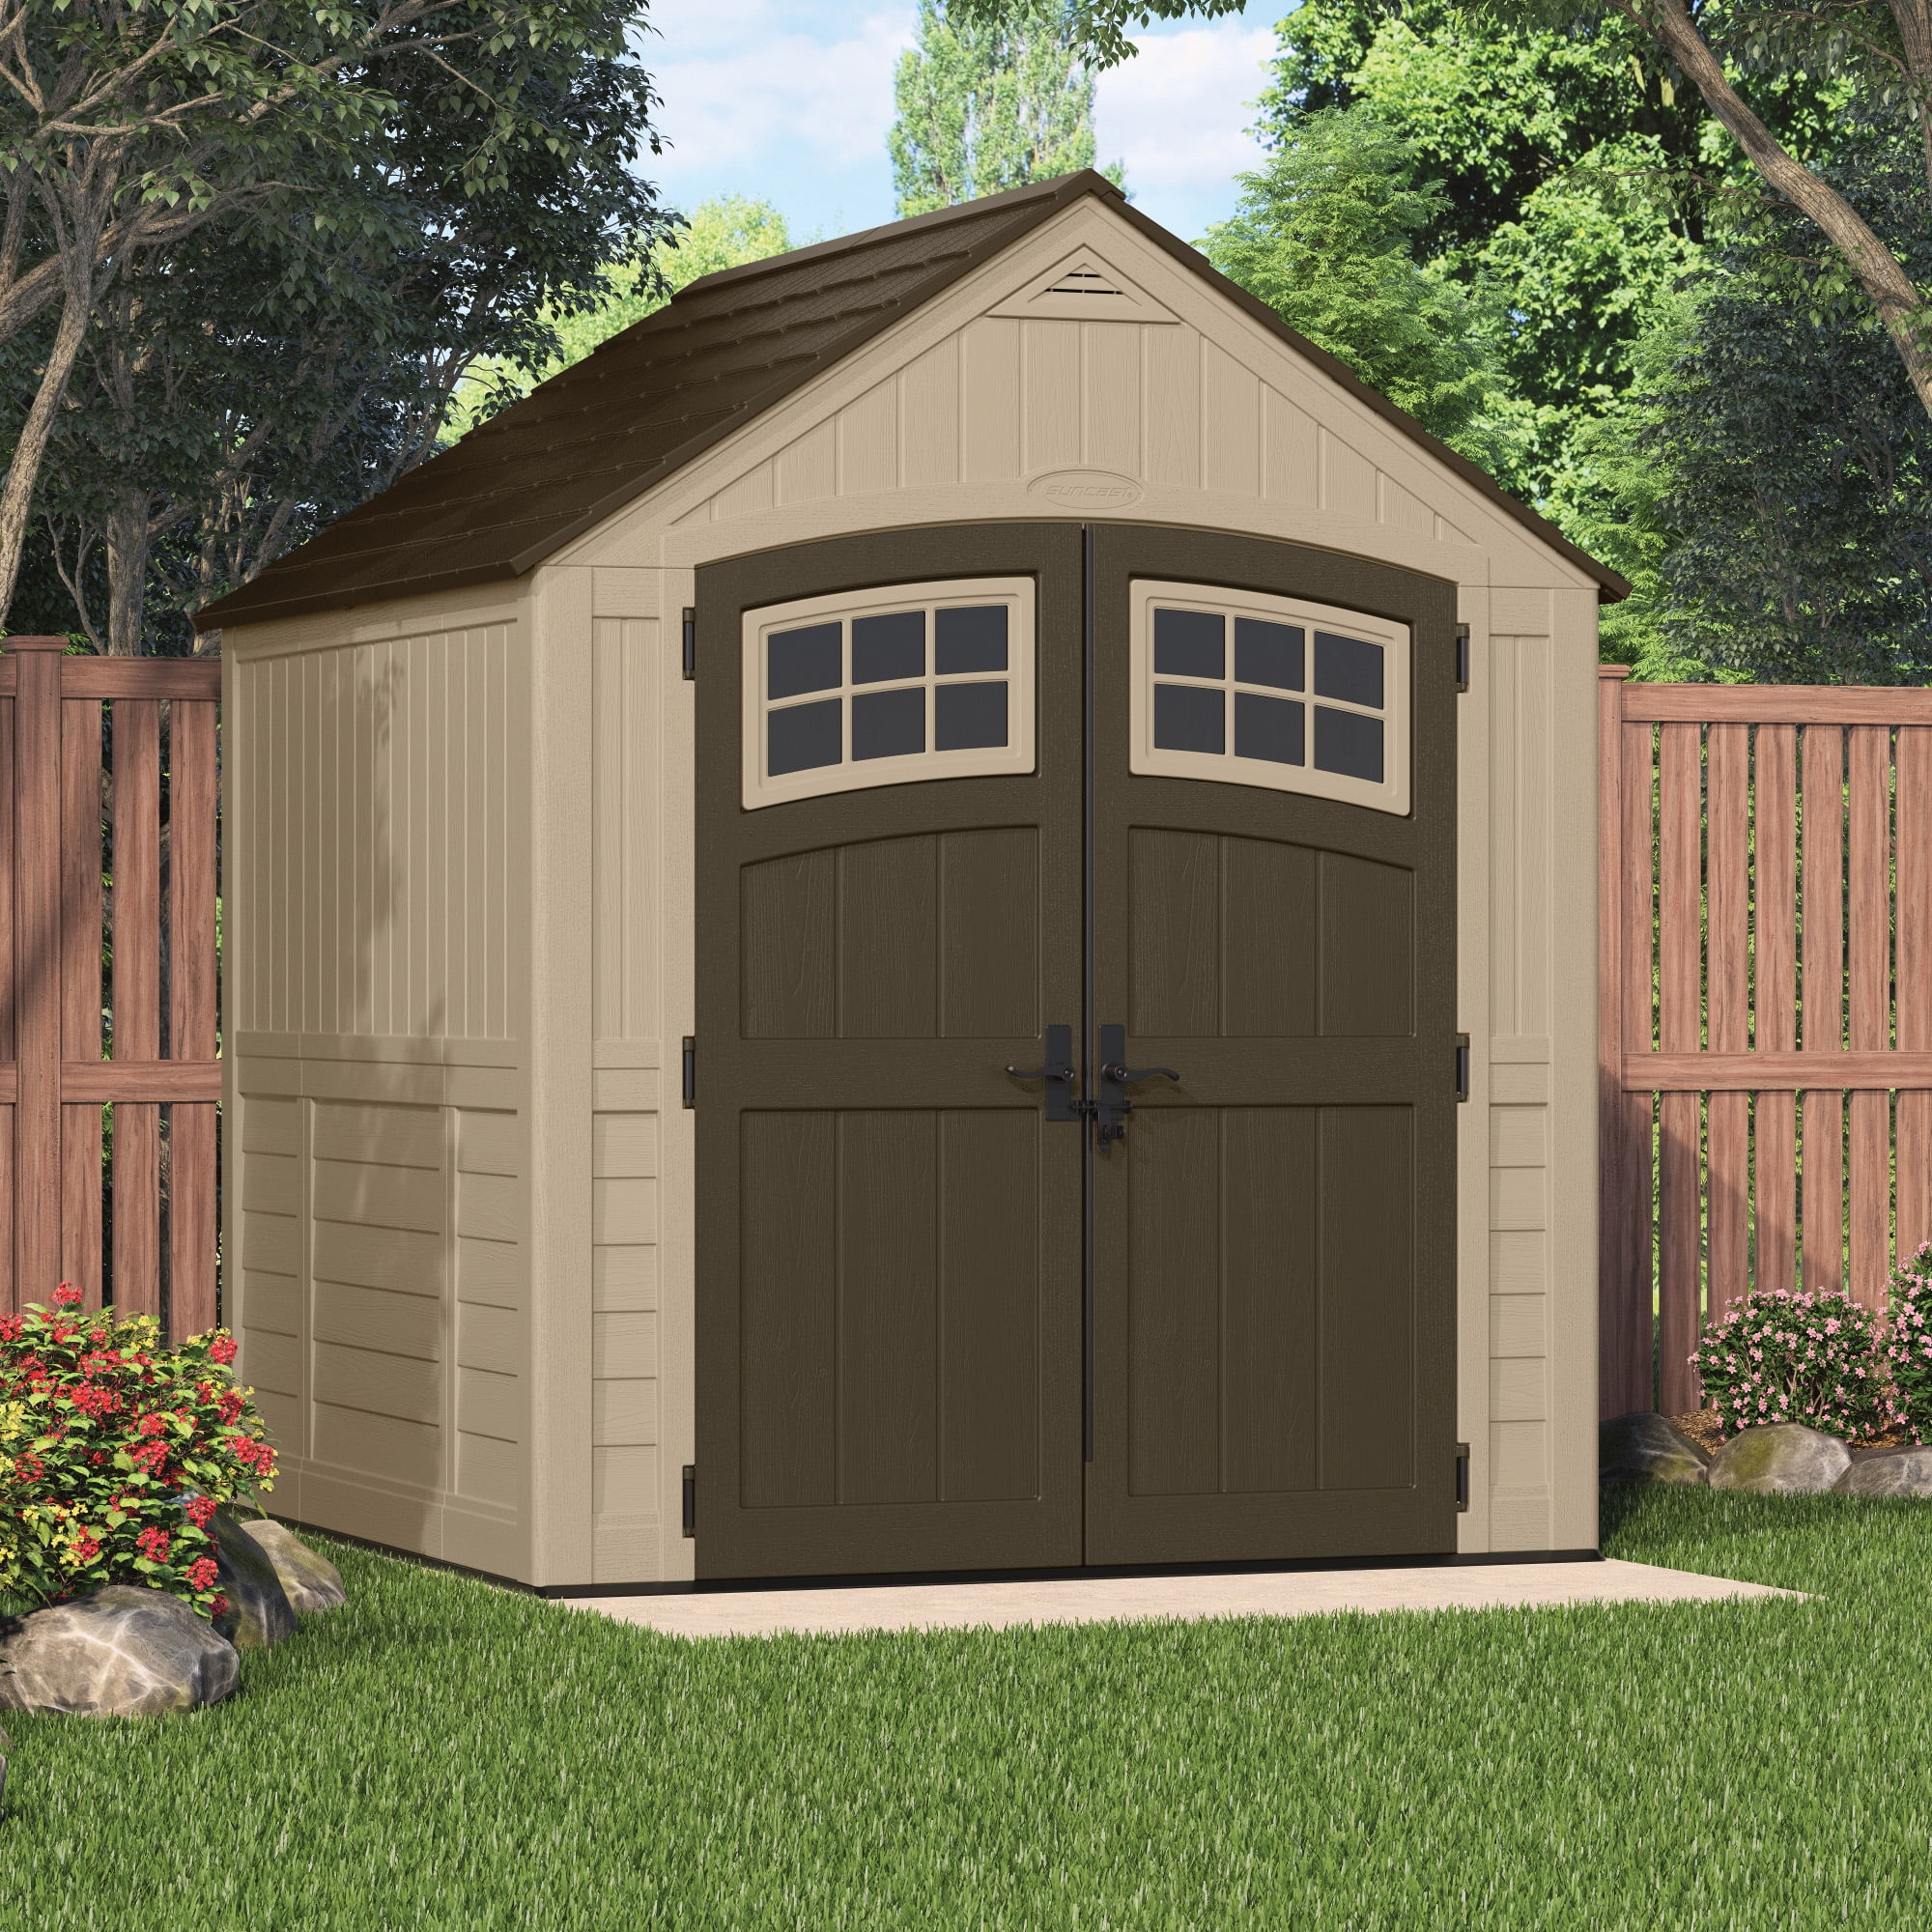 Exterior Storage Sheds / Suncast Storage Shed - Who Has The Best 